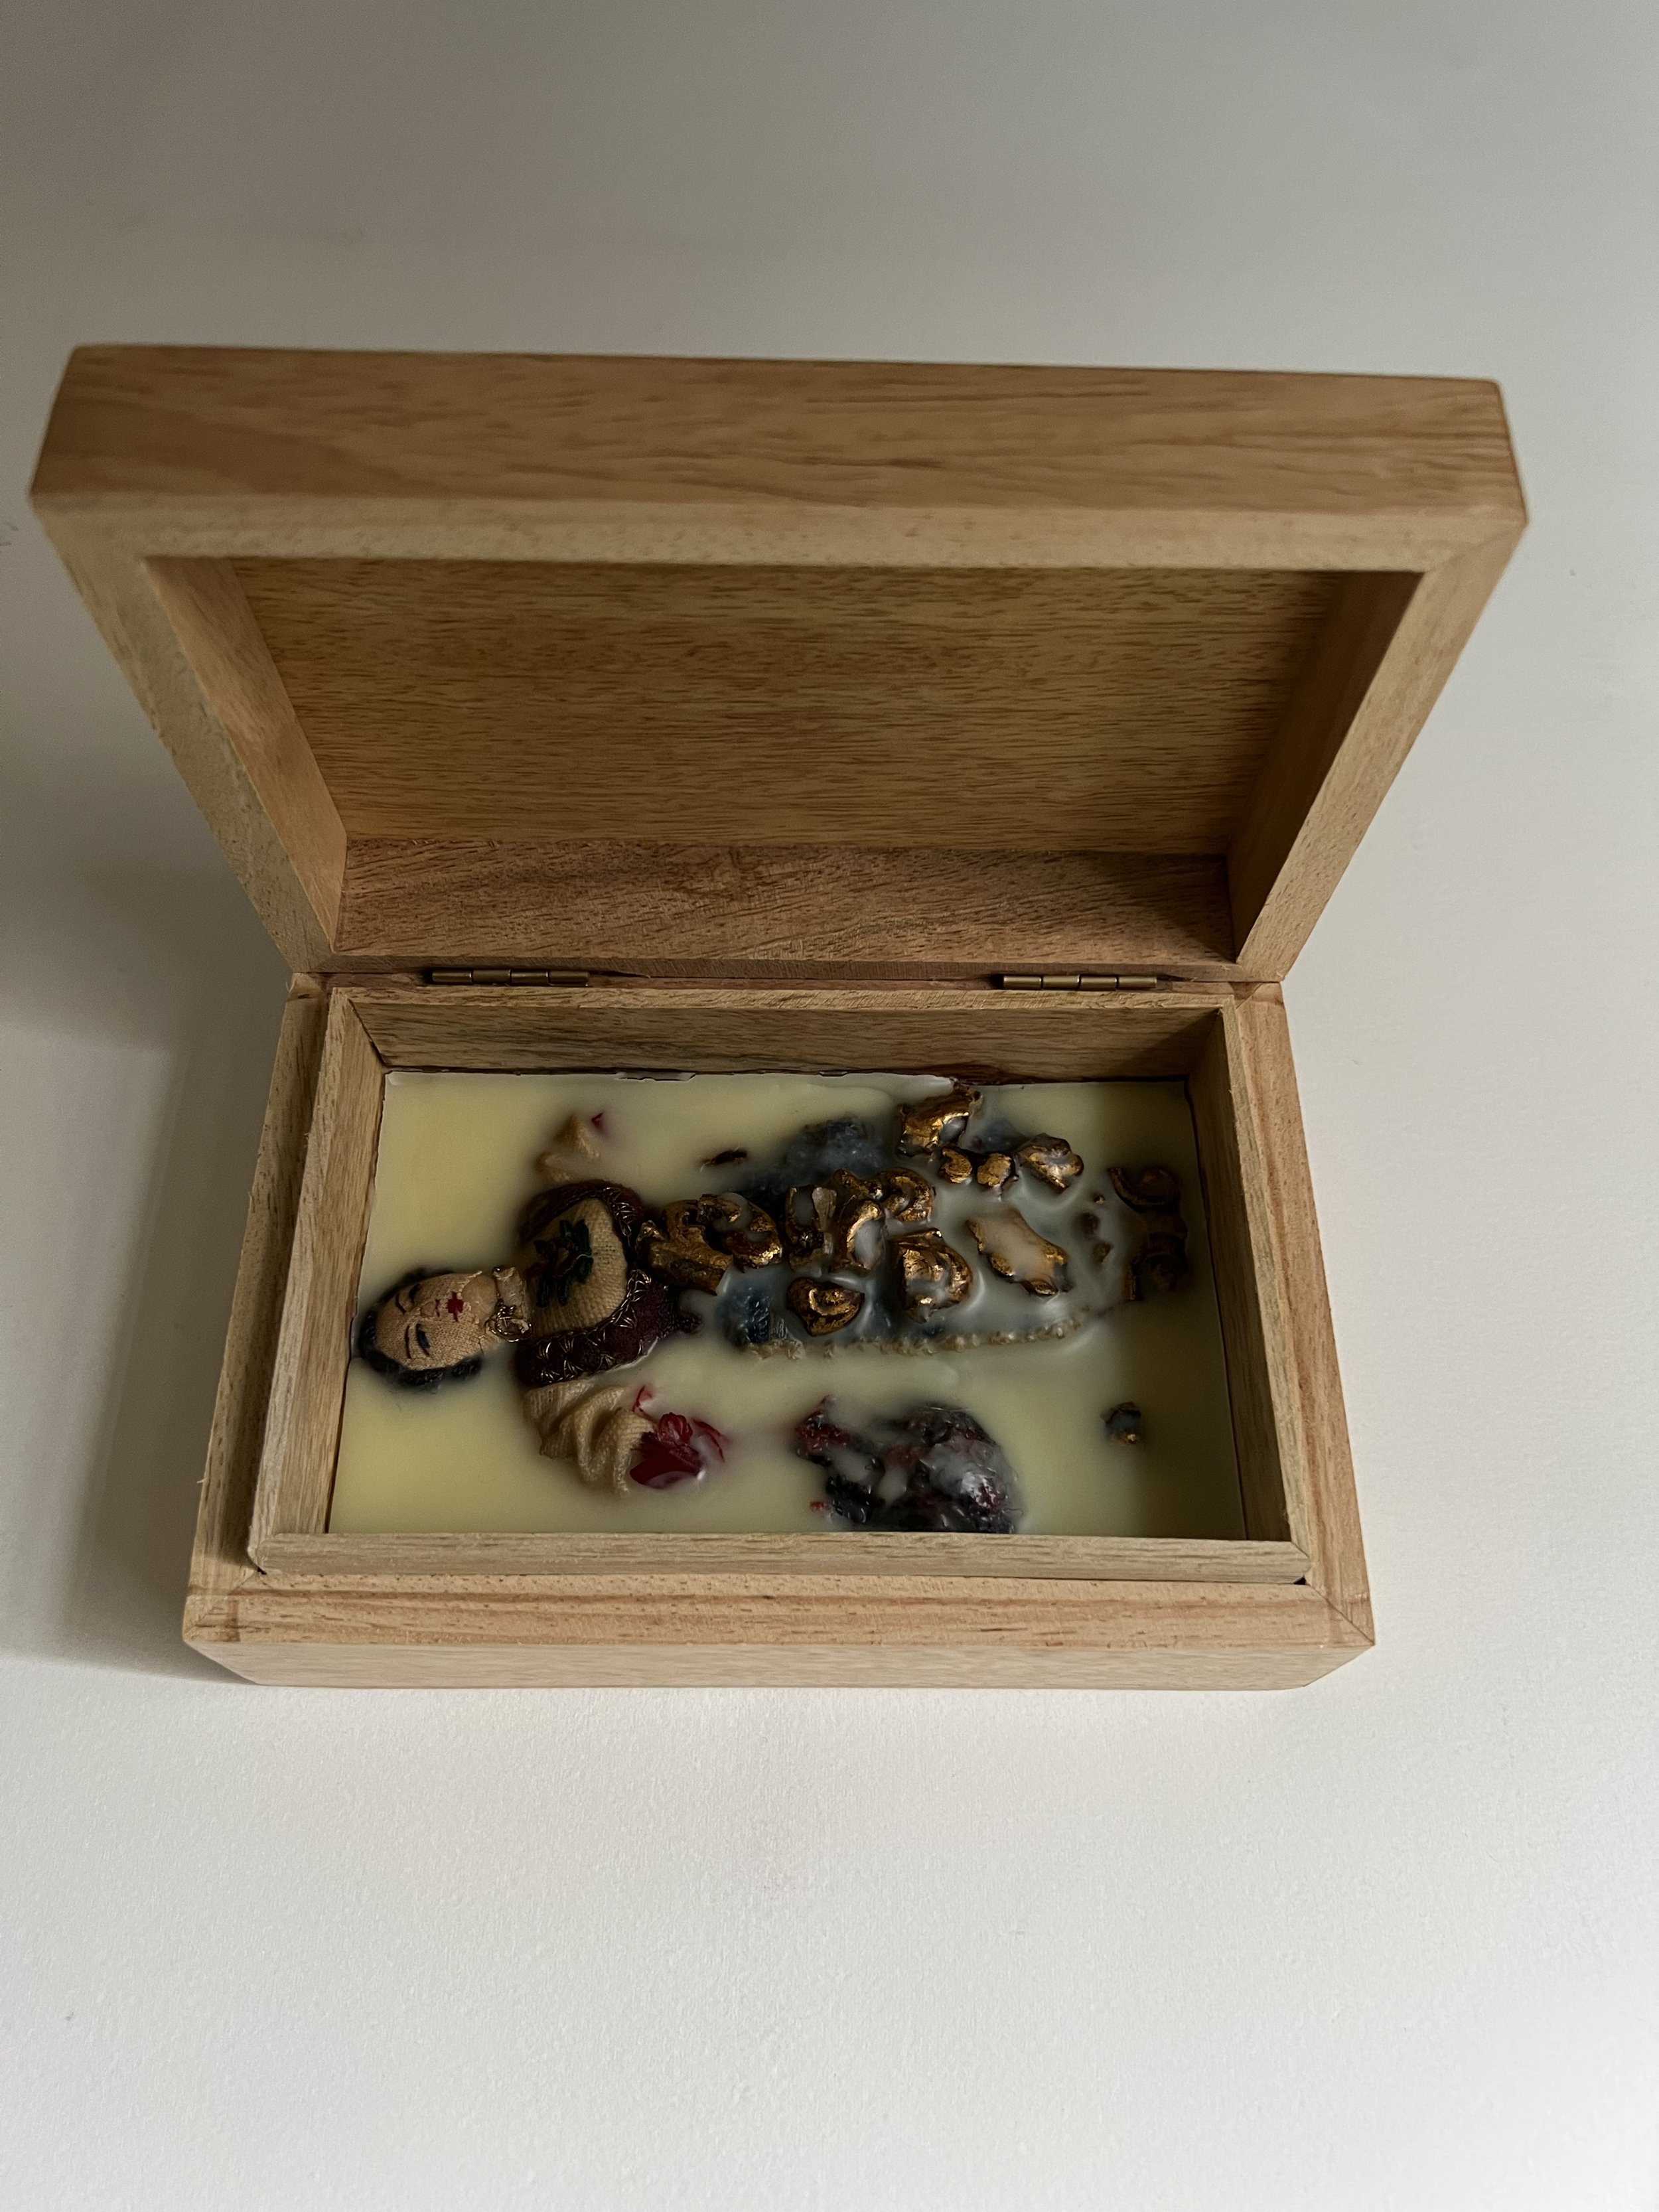   Dwindling Tribe , 2022  Folkloric doll encased in wax and wood  4 x 6 inches   $350.   A folkloric doll embedded in melted wax and displayed in a hand-carved wooden box with a lid.&nbsp;  